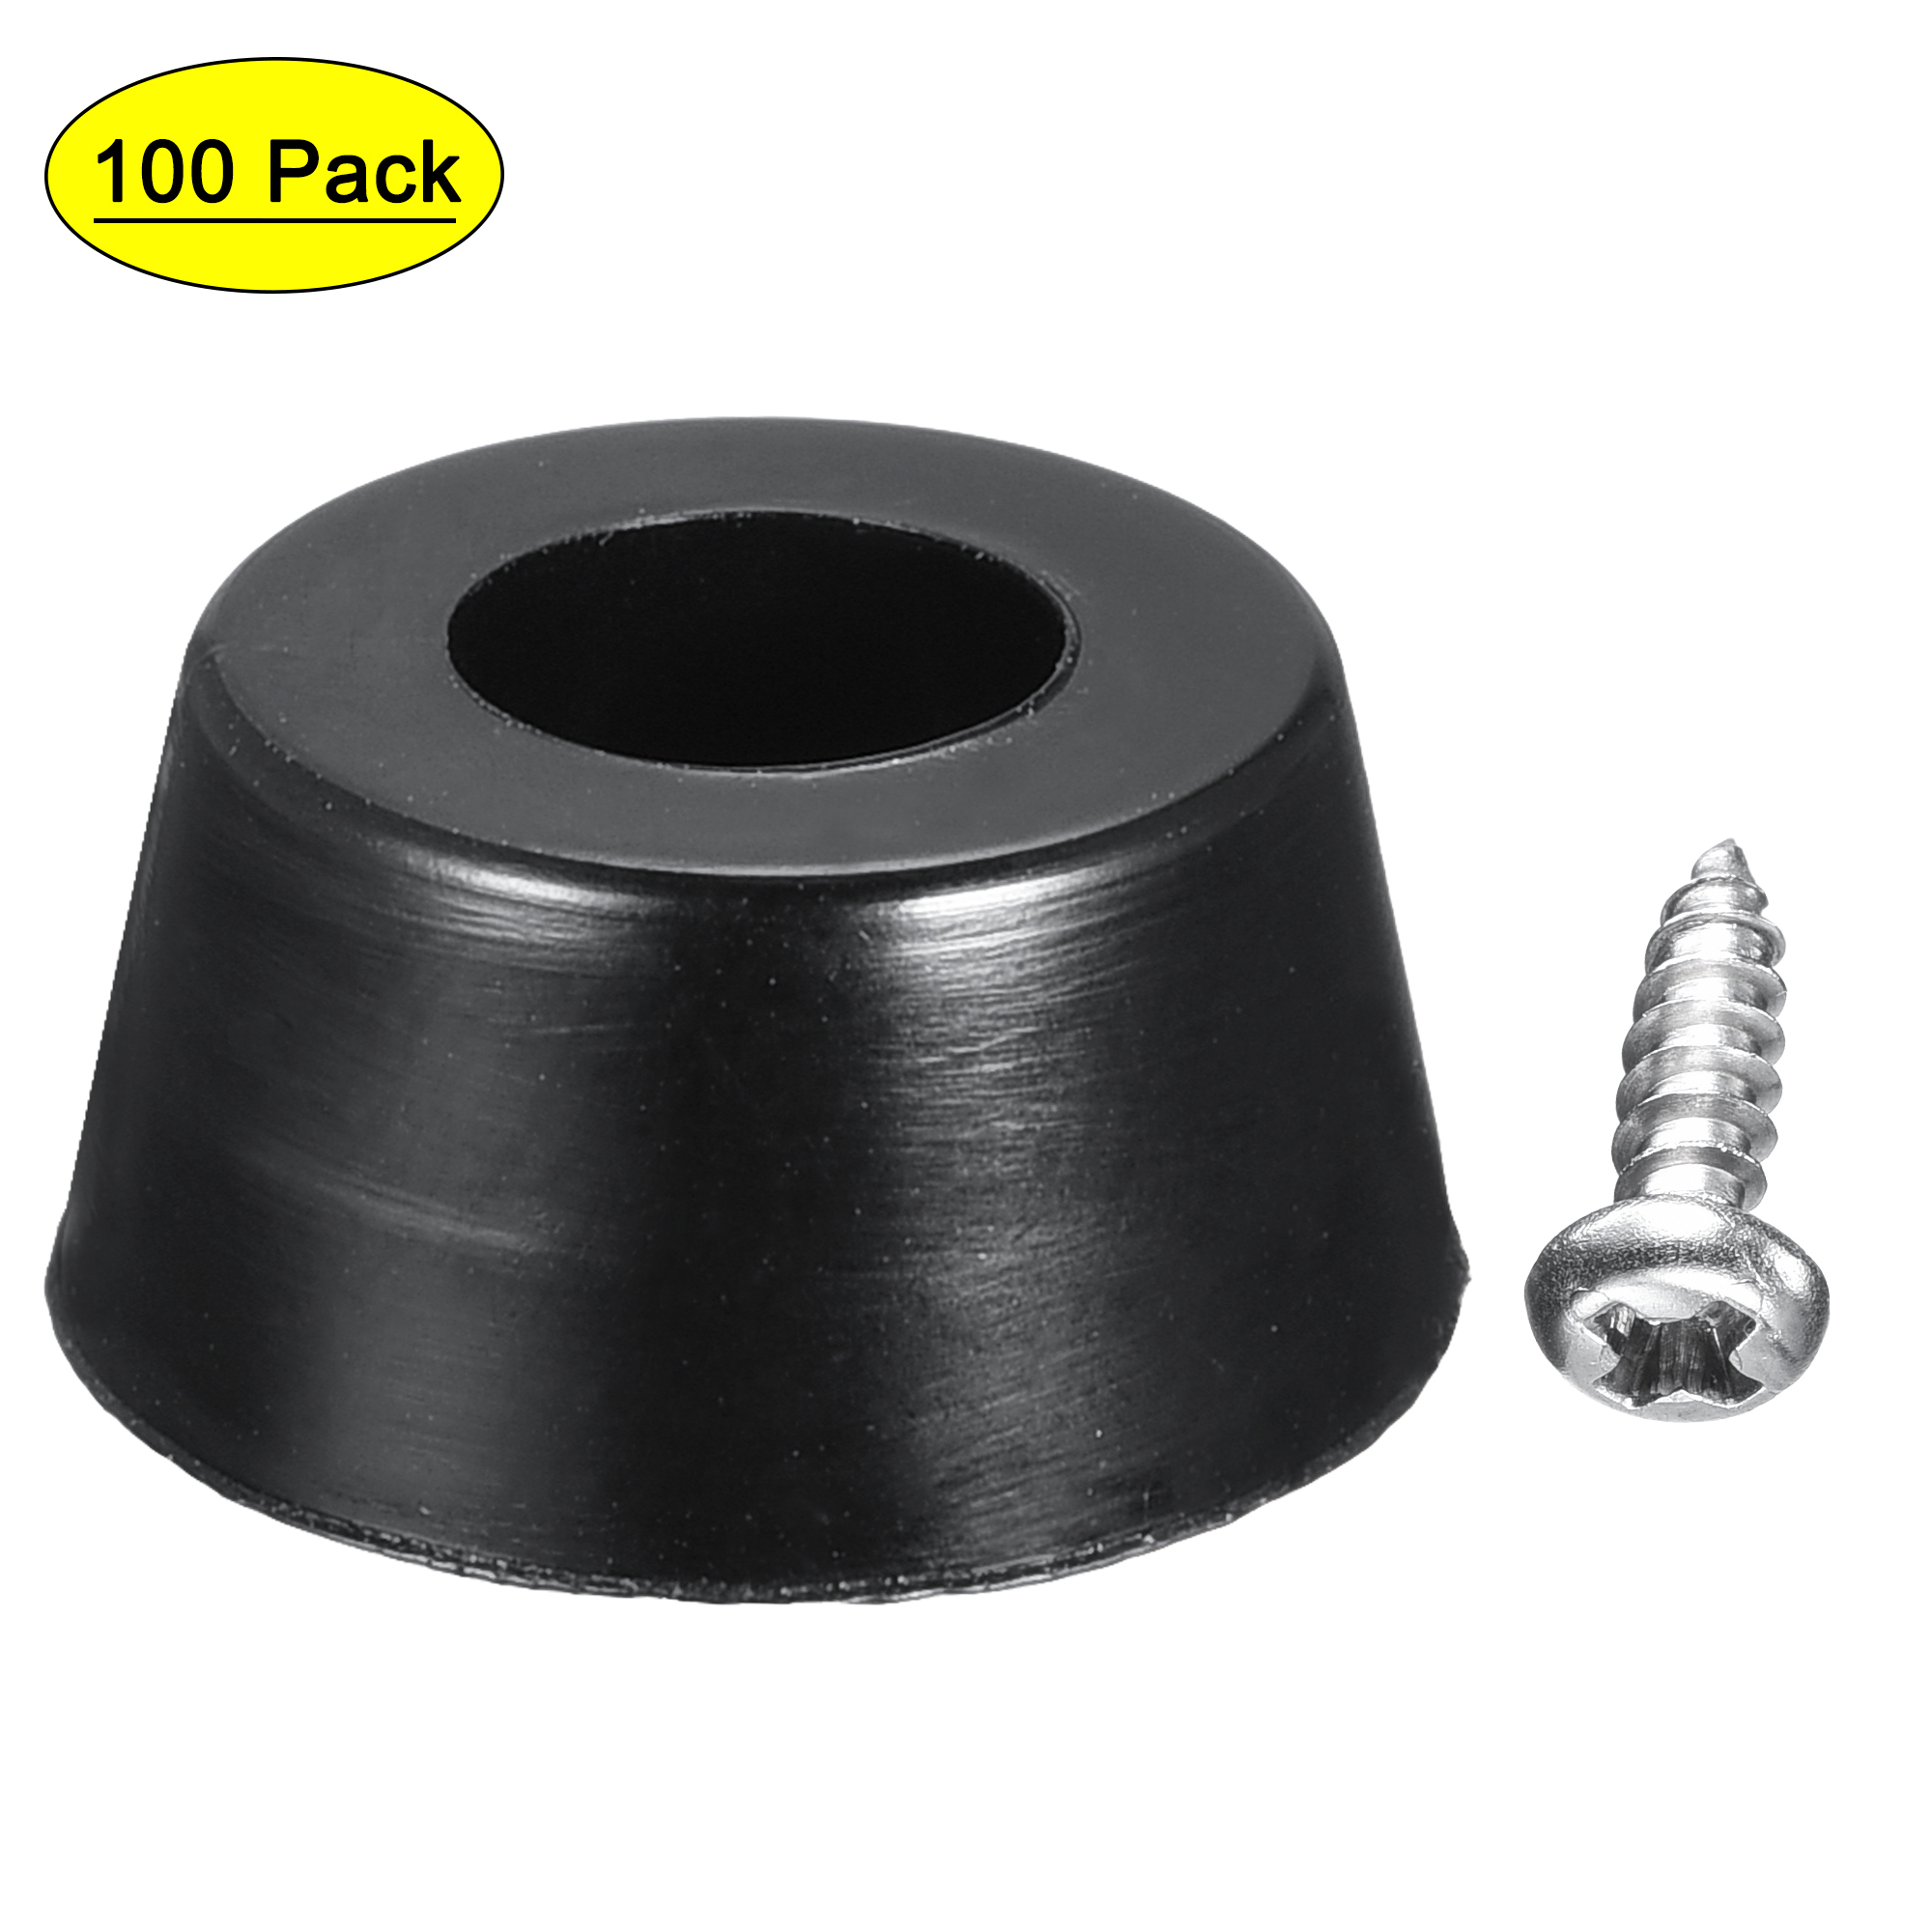 Uxcell 0.59" W x  0.31" H Rubber Bumper Feet, Stainless Steel Screws and Washer 100 Pack - image 1 of 5